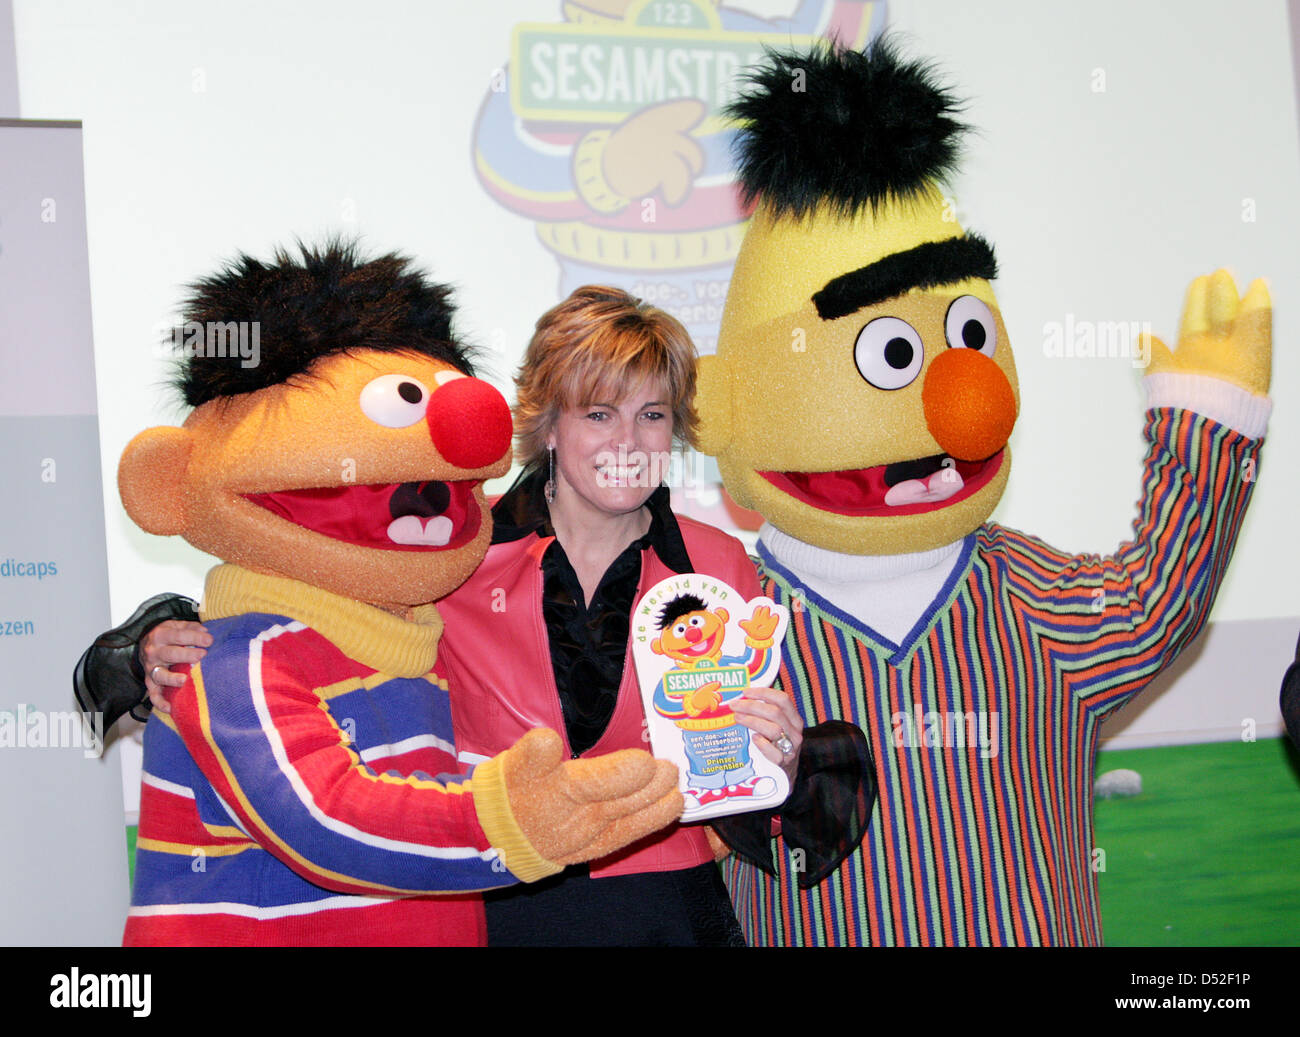 Princess Laurentien of the Netherlands (C) smiles with Sesame Street characters Ernie and Bert after she received the first copy of the book of 'The World of Sesame Street' in The Hague, the Netherlands, 25 February 2010. The Princess wrote the text of the book. This edition of Sesame Street books is the third in a sequence of books for children with a disability. Photo: Patrick va Stock Photo